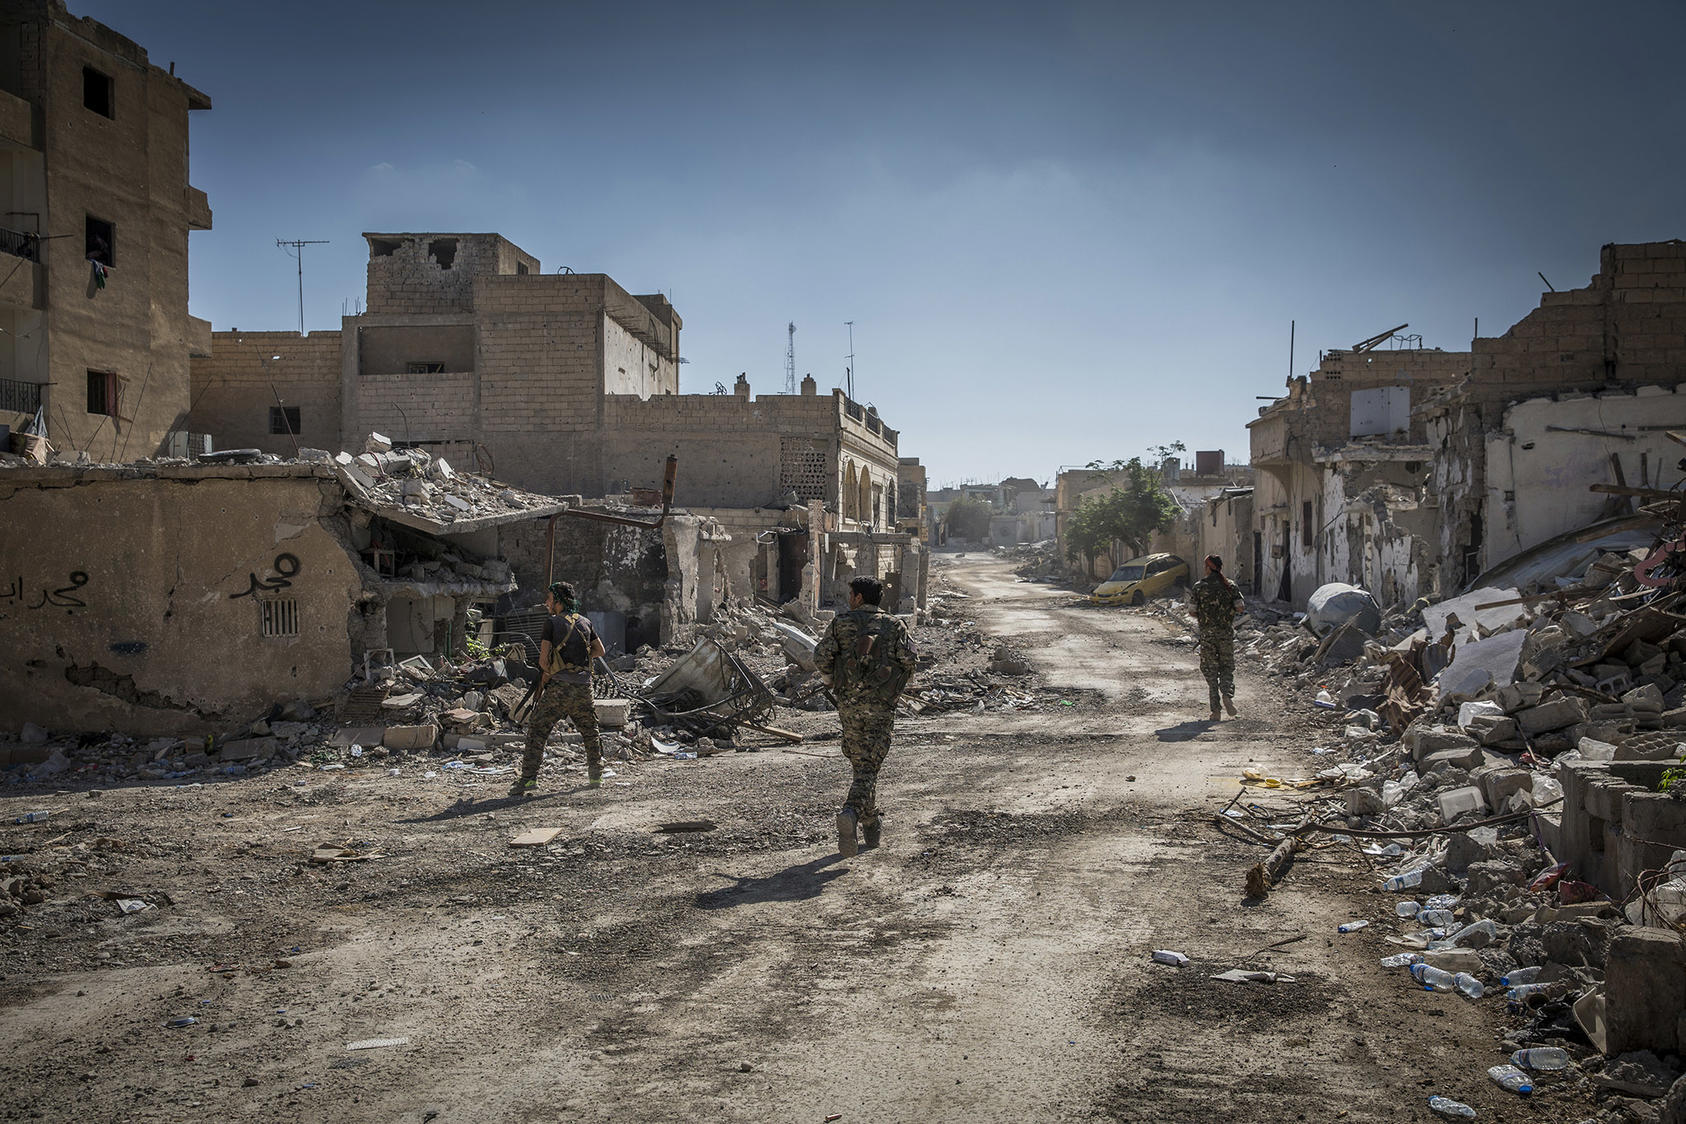 Syrian Democratic Forces fighters on Oct. 12, 2017 in Raqqa, Syria, a former ISIS stronghold. (Ivor Prickett/The New York Times)